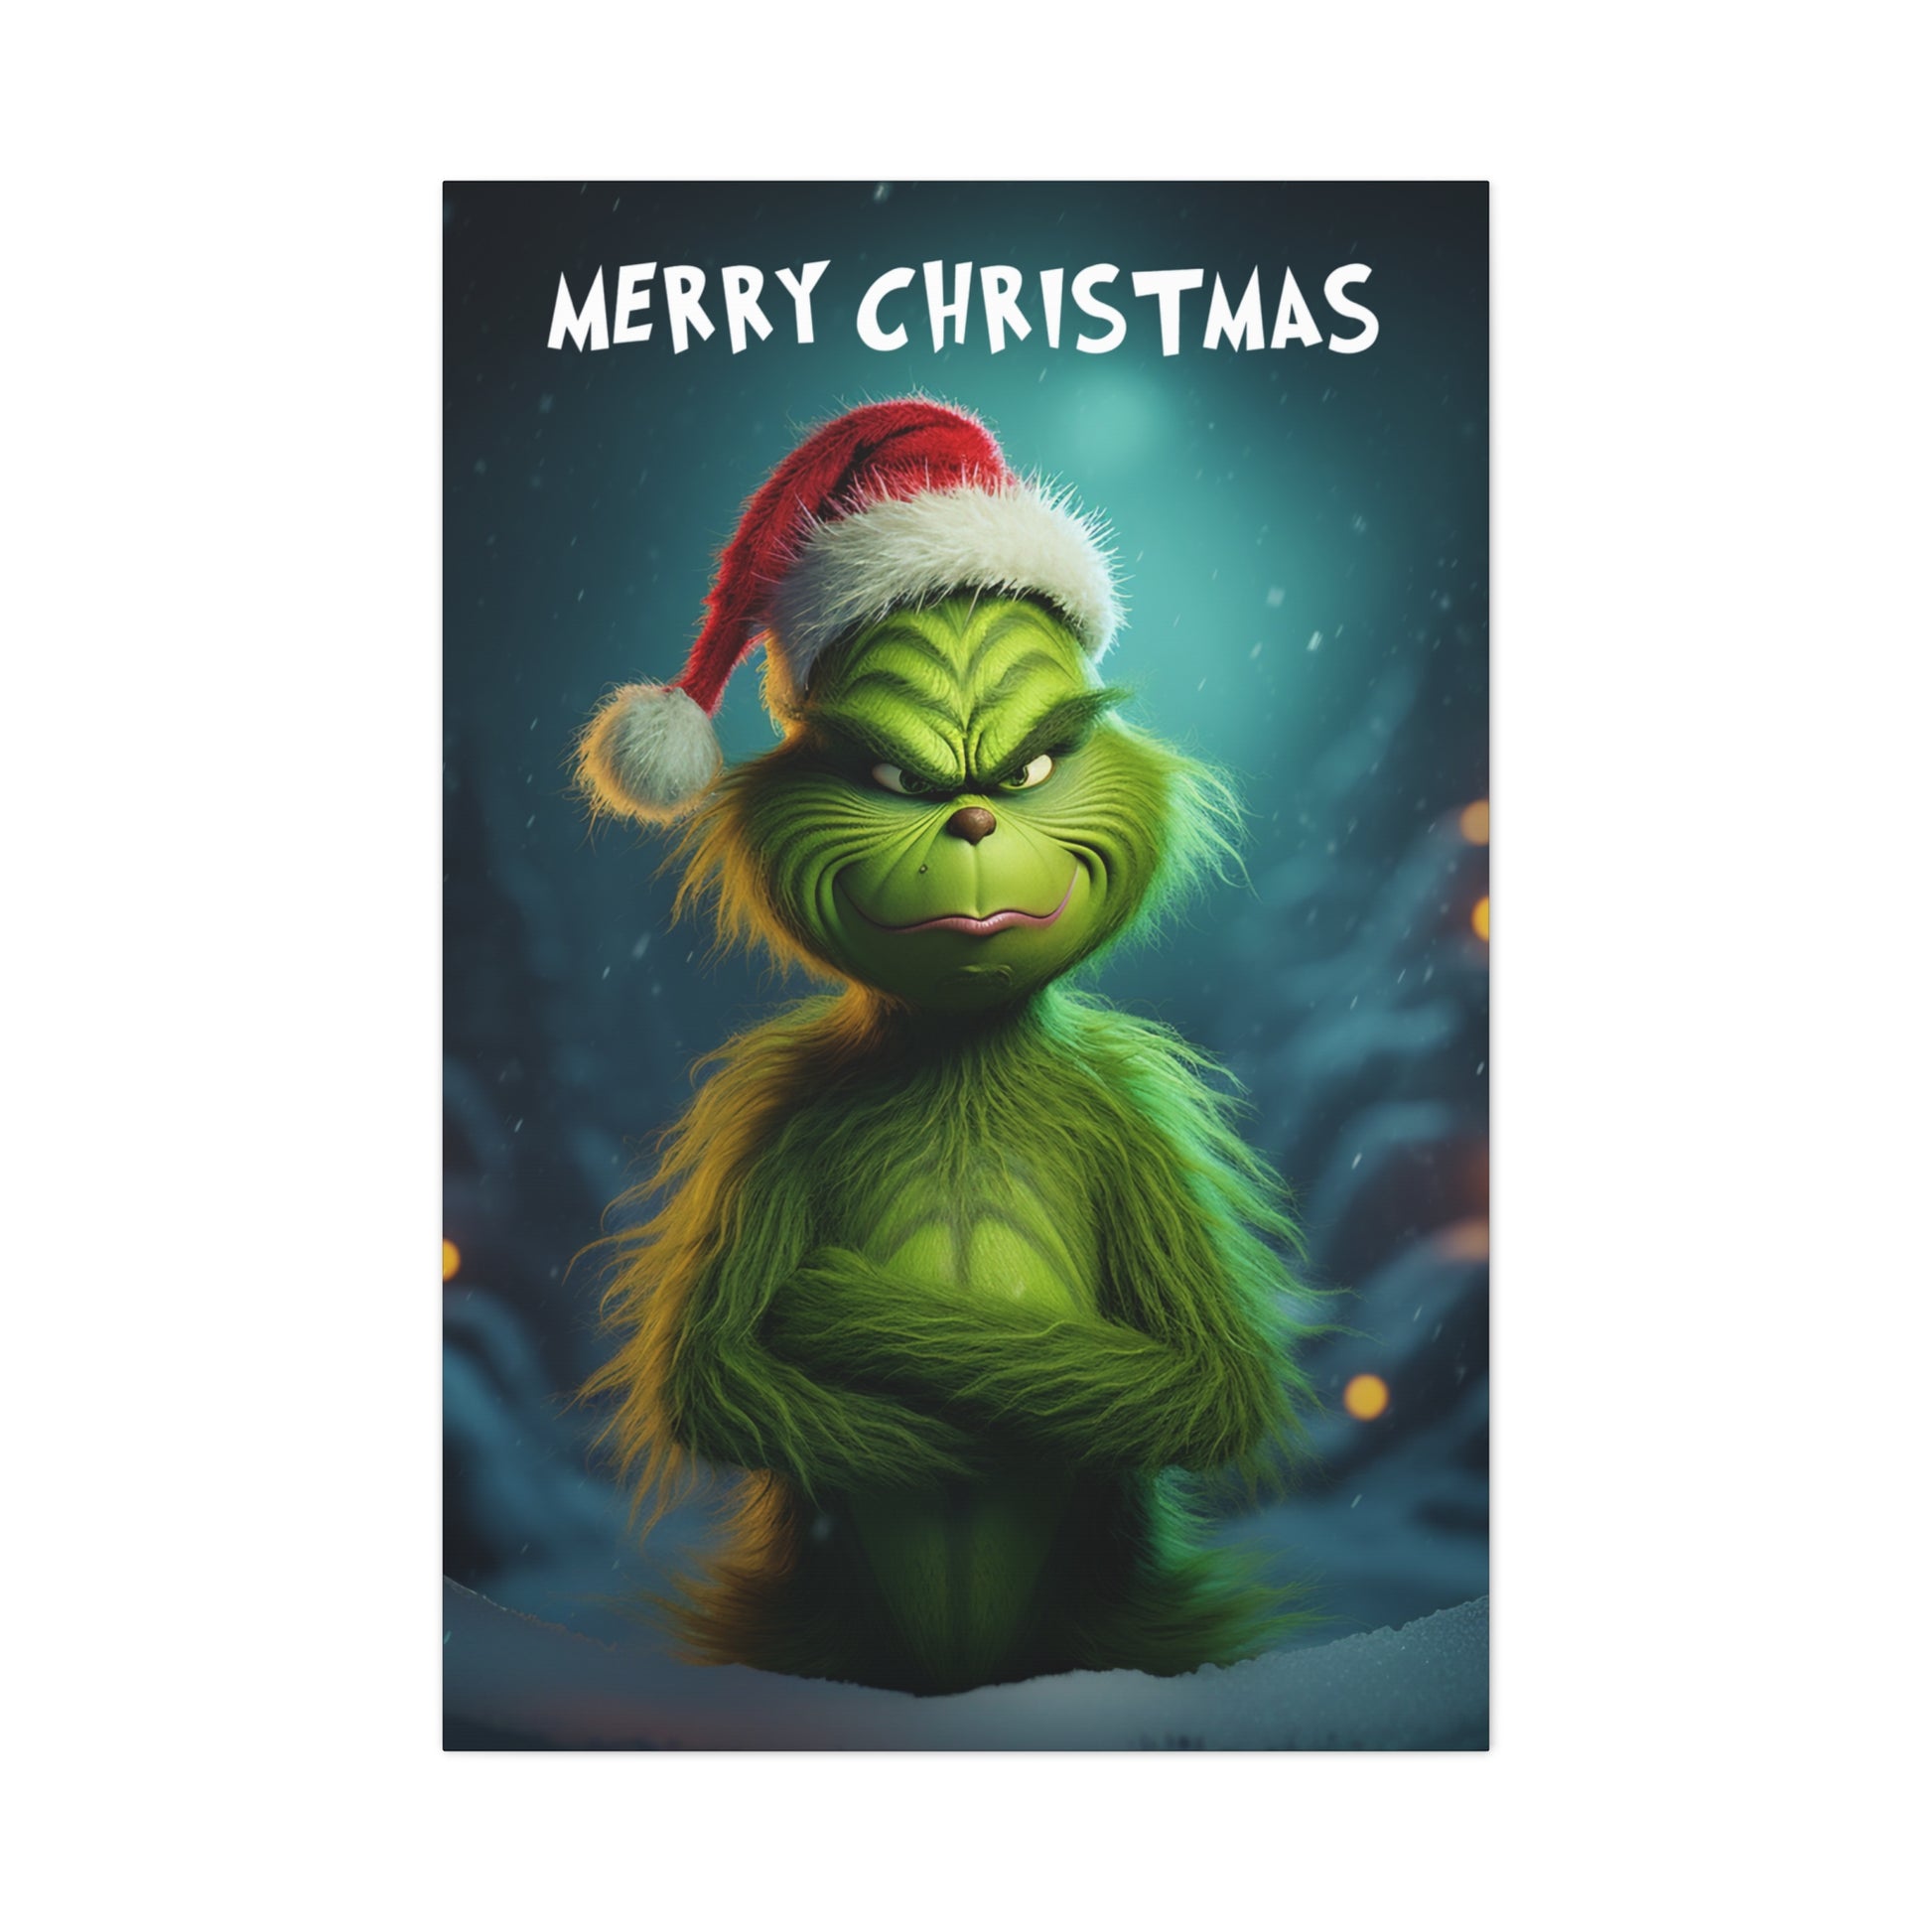 The Grinch Christmas decor indoor